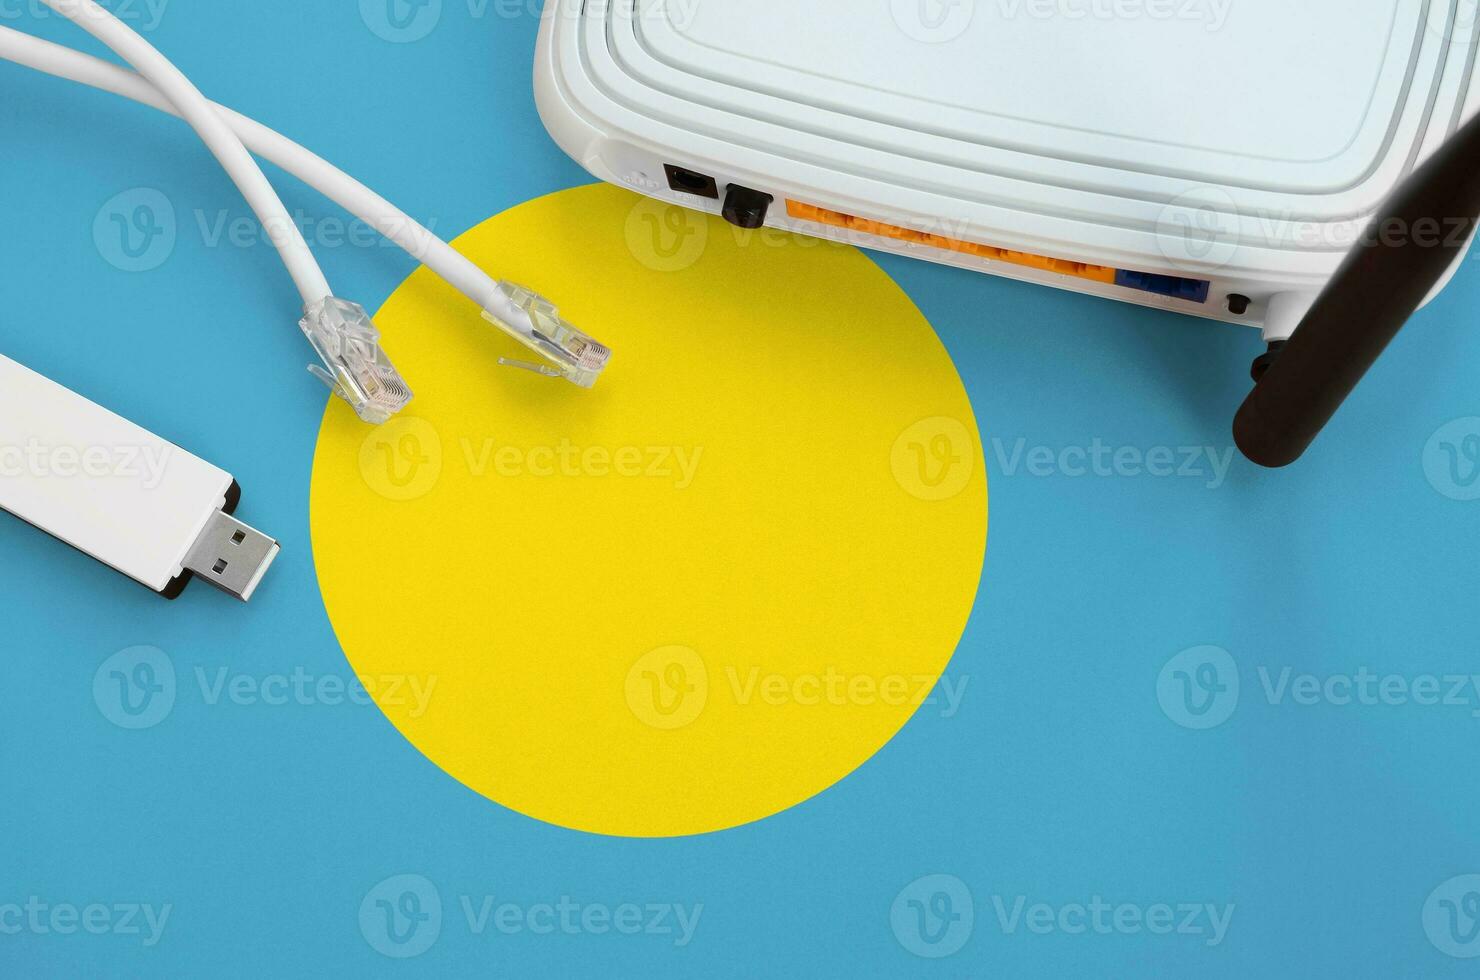 Palau flag depicted on table with internet rj45 cable, wireless usb wifi adapter and router. Internet connection concept photo